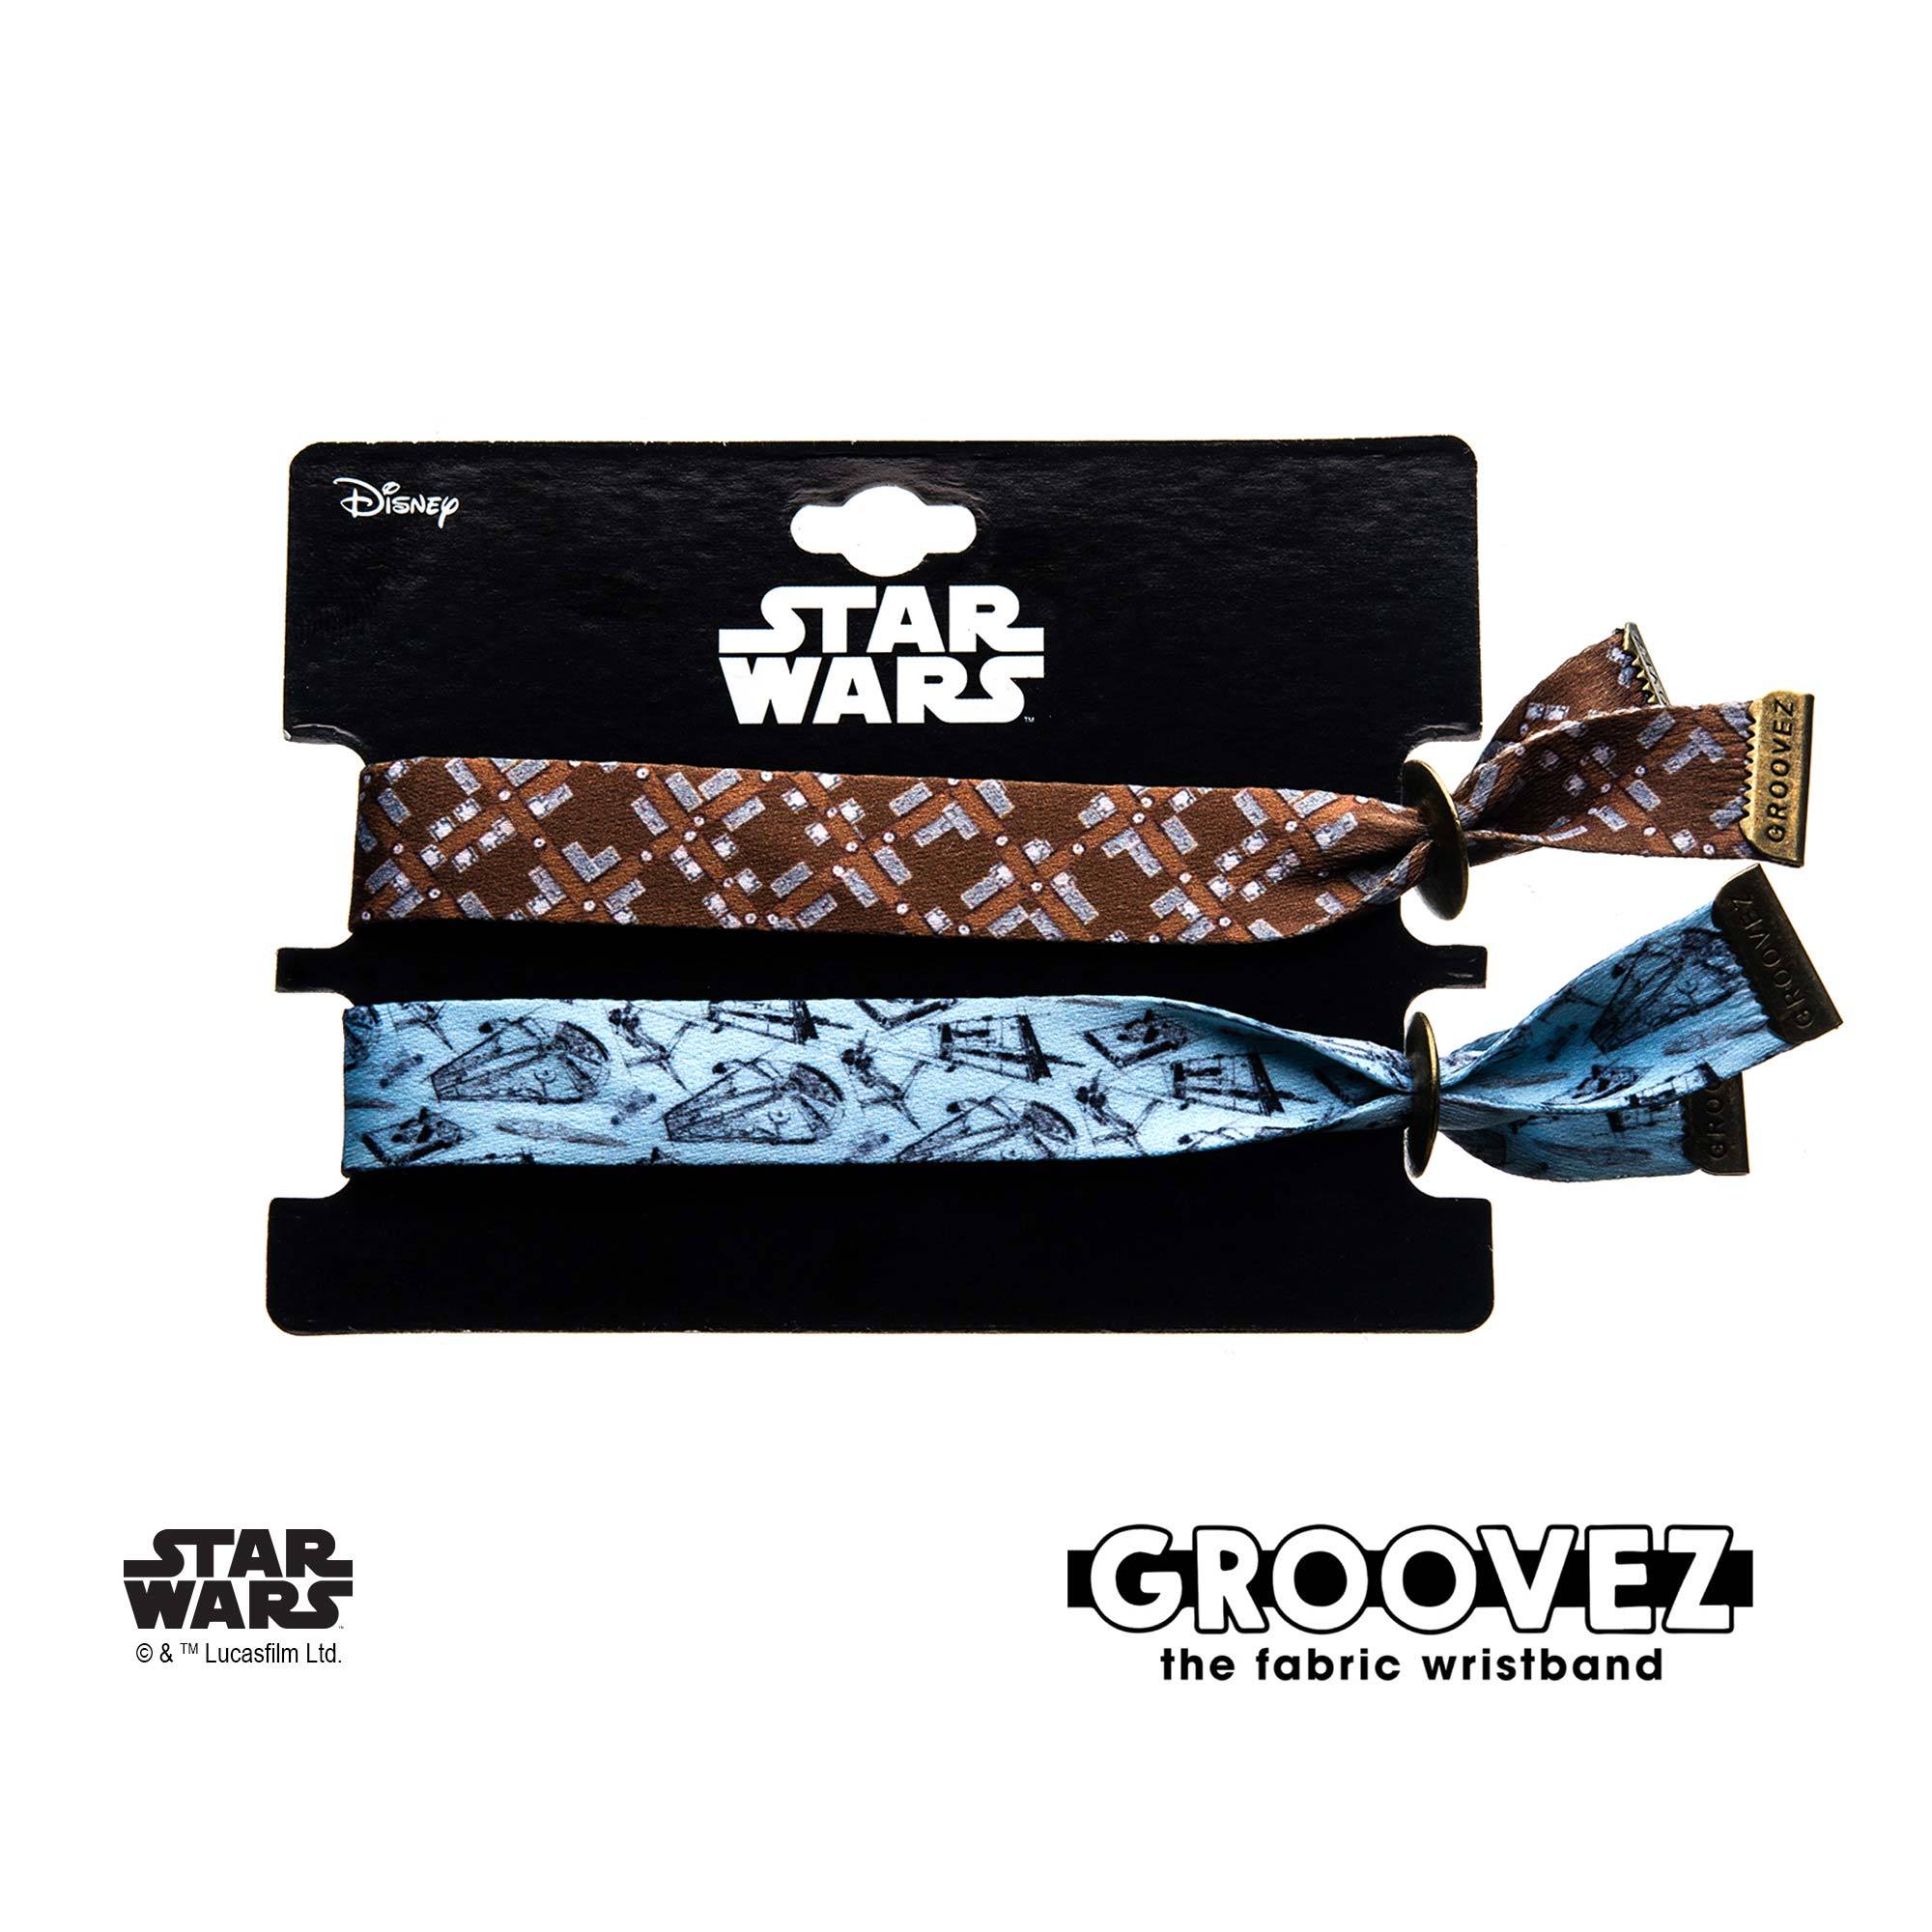 Star Wars Chewbacca and Han Solo Grooves (tm) Fabric Bracelet Set